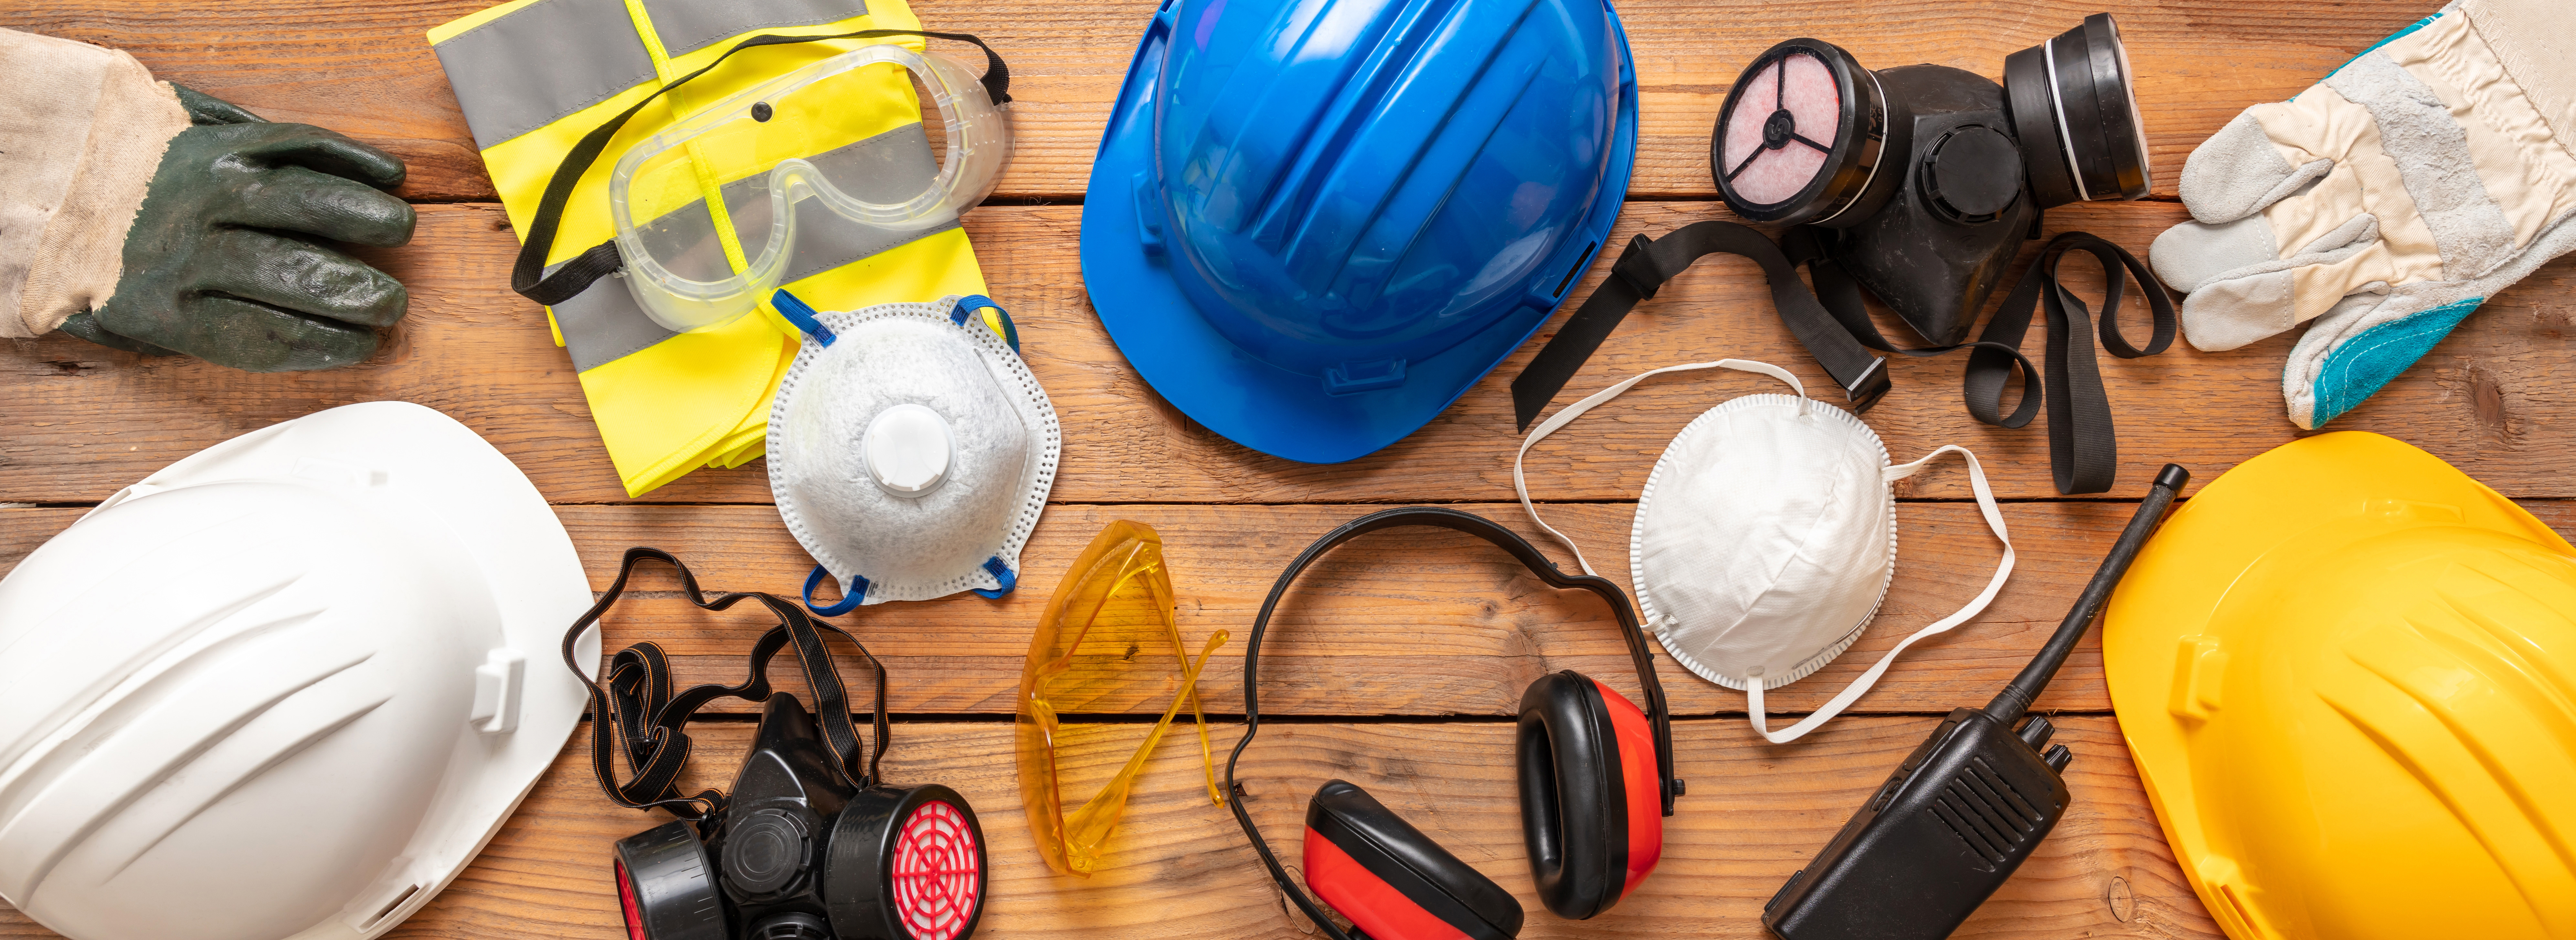 10 Critical Workplace Hazards Every Retailer Should Know